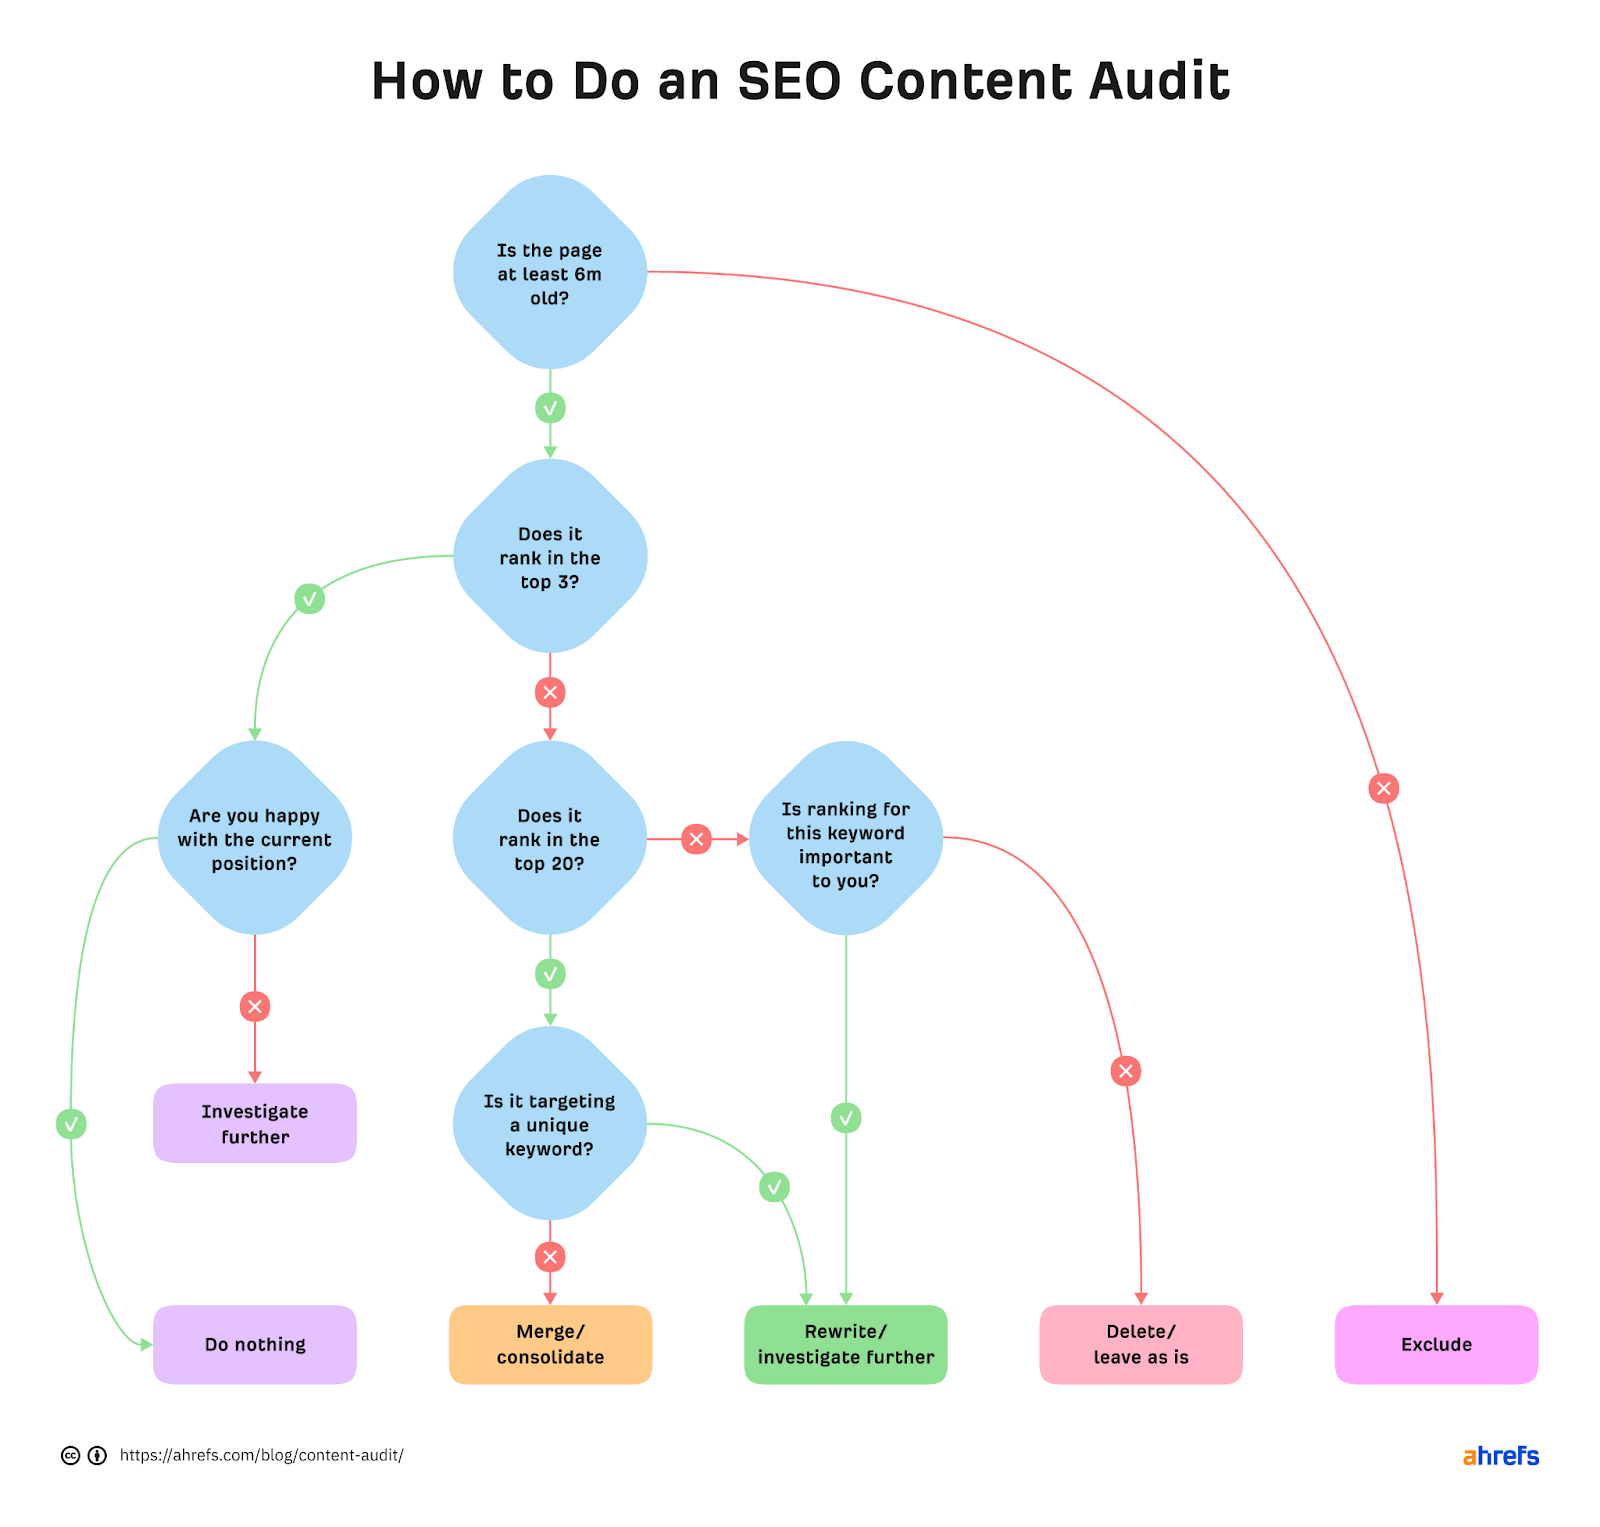 How to Do a Content Audit in 2022